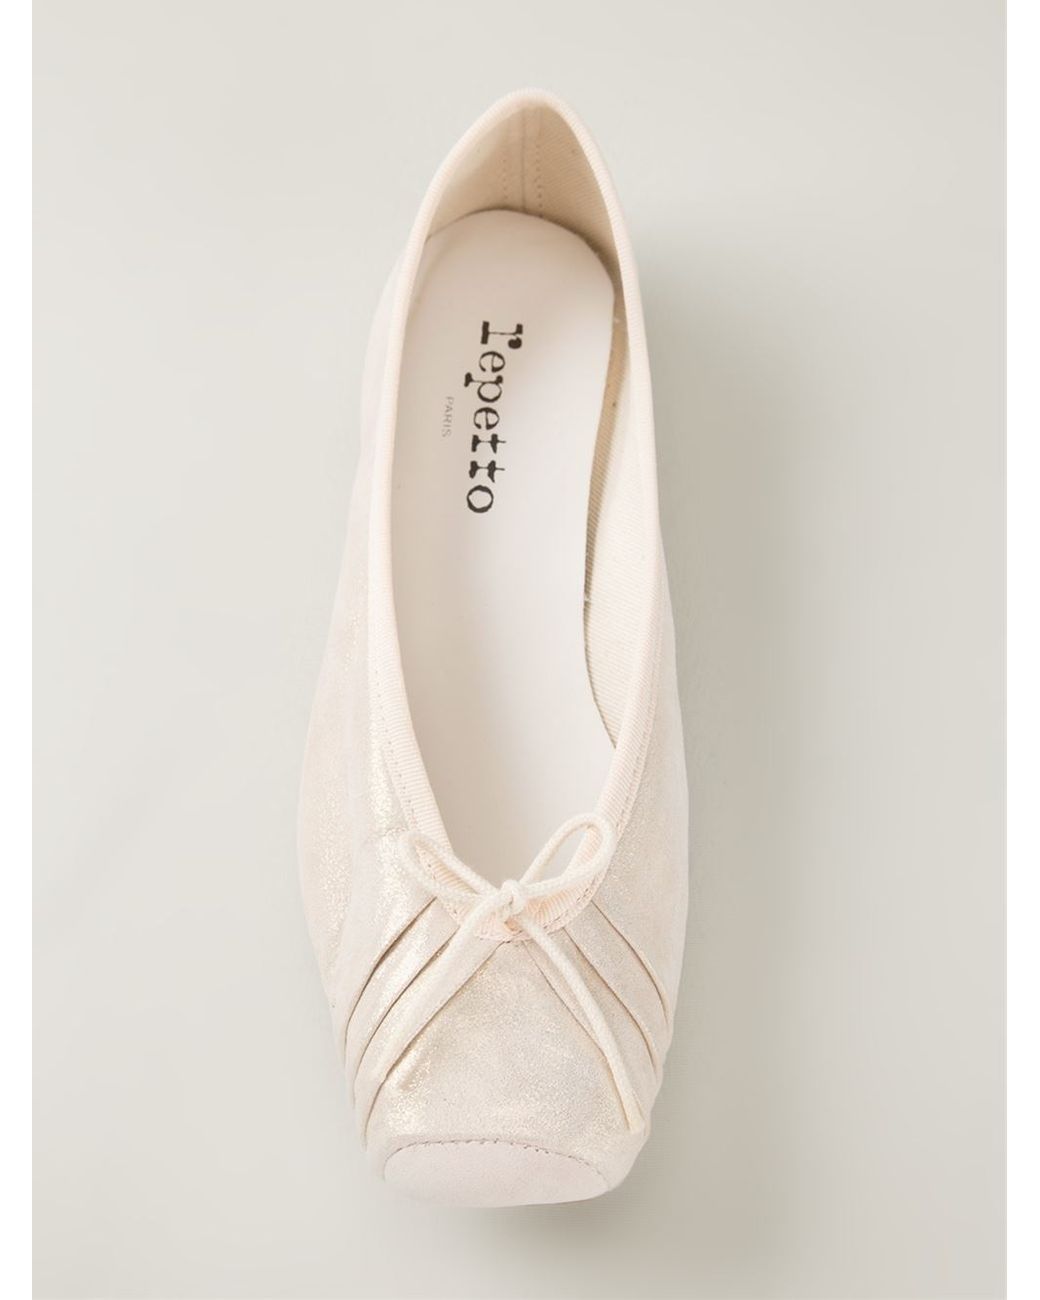 Repetto Bolchoi Ballet Flats in Natural | Lyst